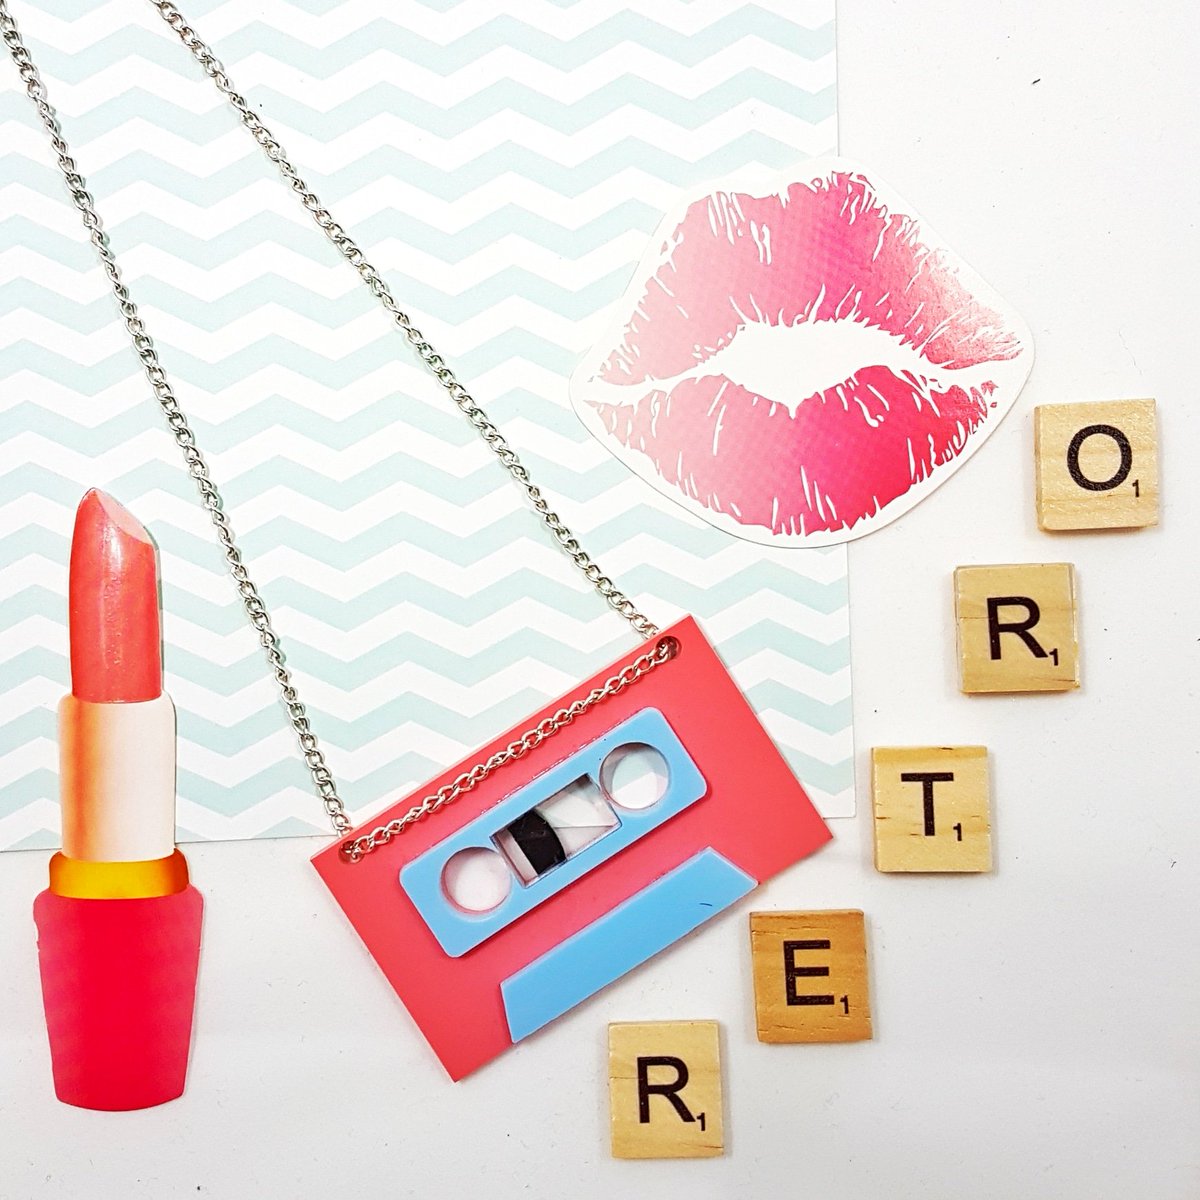 Since we launched our Acrylic #jewellery range a few months ago, we've been working on a few more designs to release. This one is an absolute FAVE of ours! We love #retro throwbacks and this one has to be the ultimate 80's/90's tribute! Anyone else miss cassette tapes?! 😂😂😂